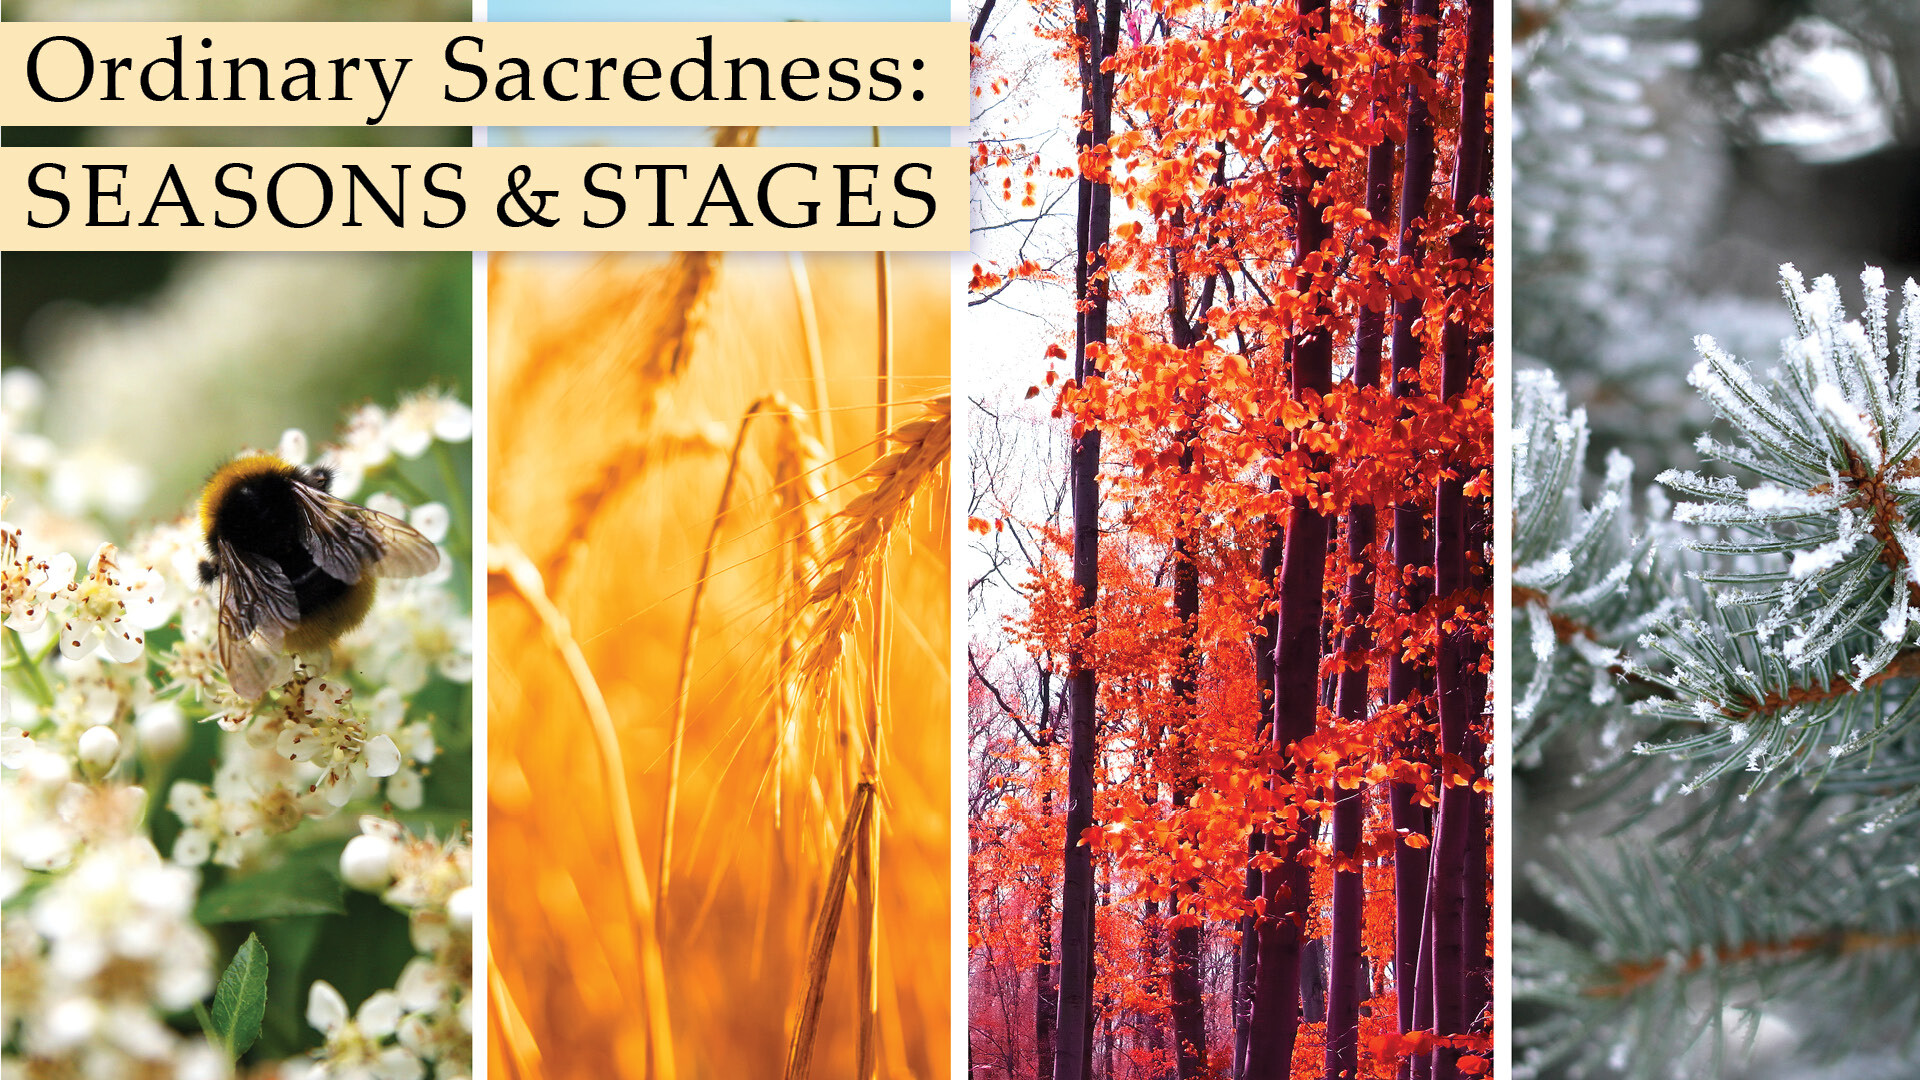 Seasons & Stages